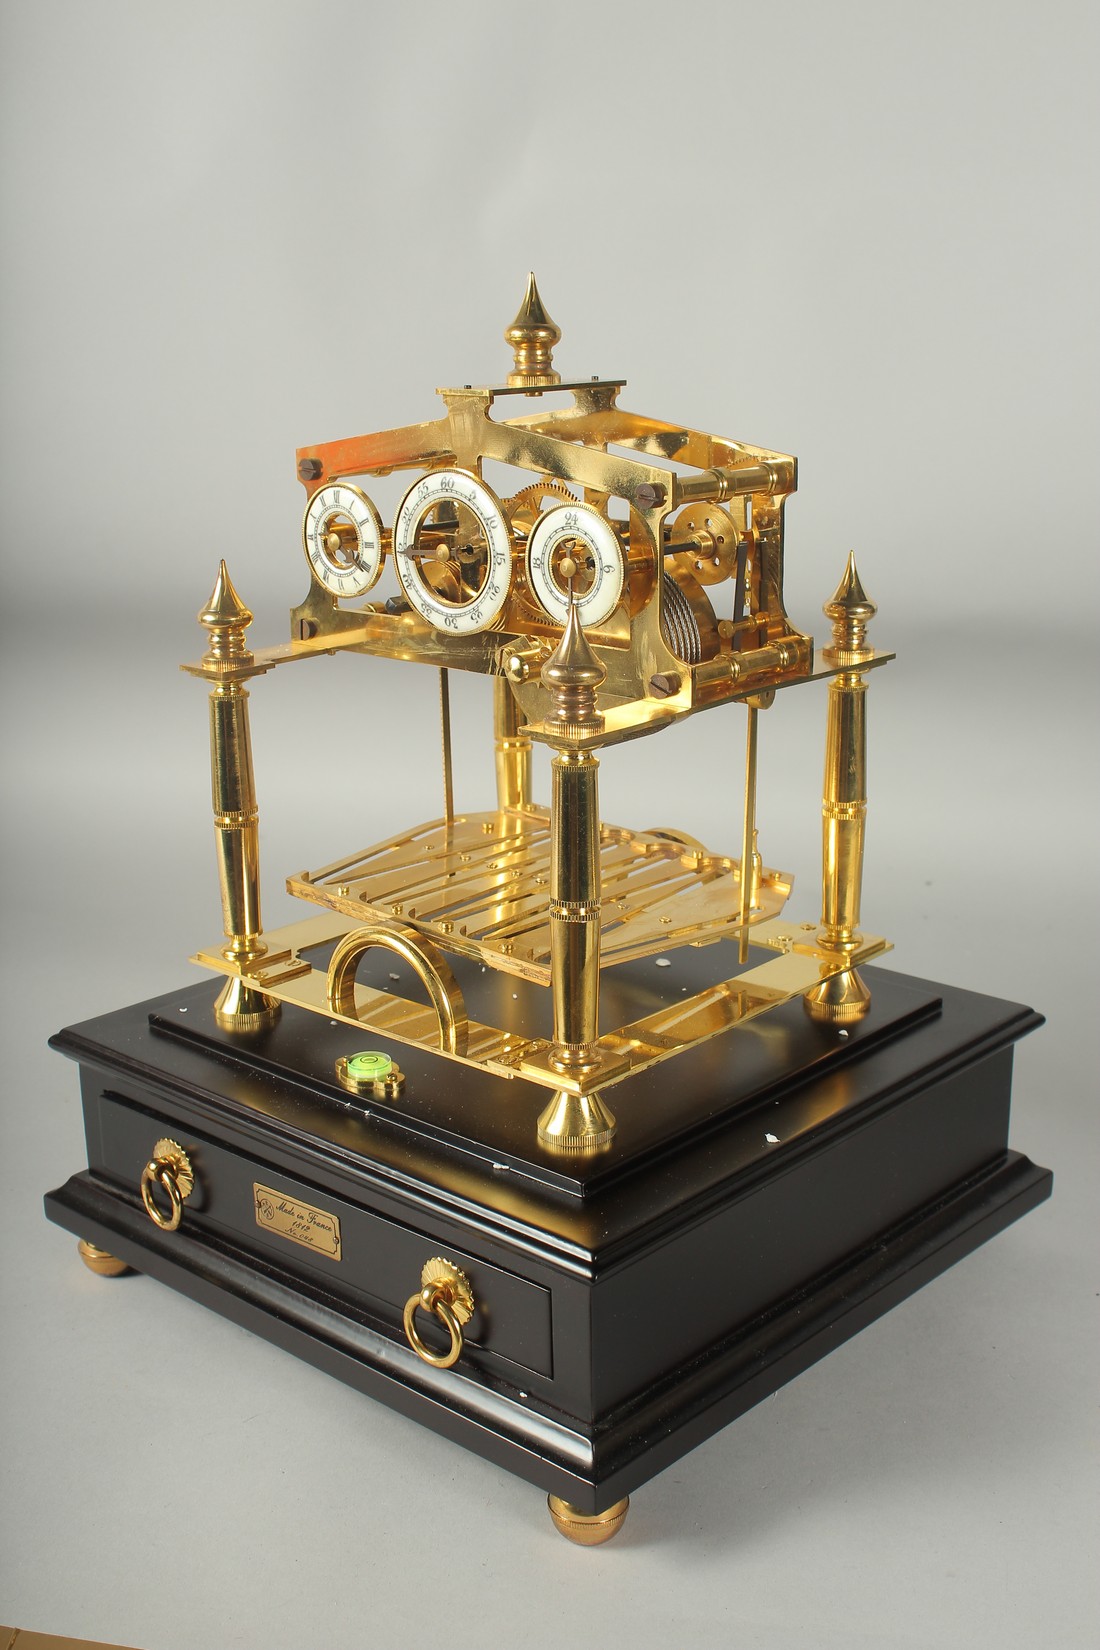 A GOOD ROLLING BALL CLOCK with three dials in a glass case. 16ins high overall. - Image 3 of 4